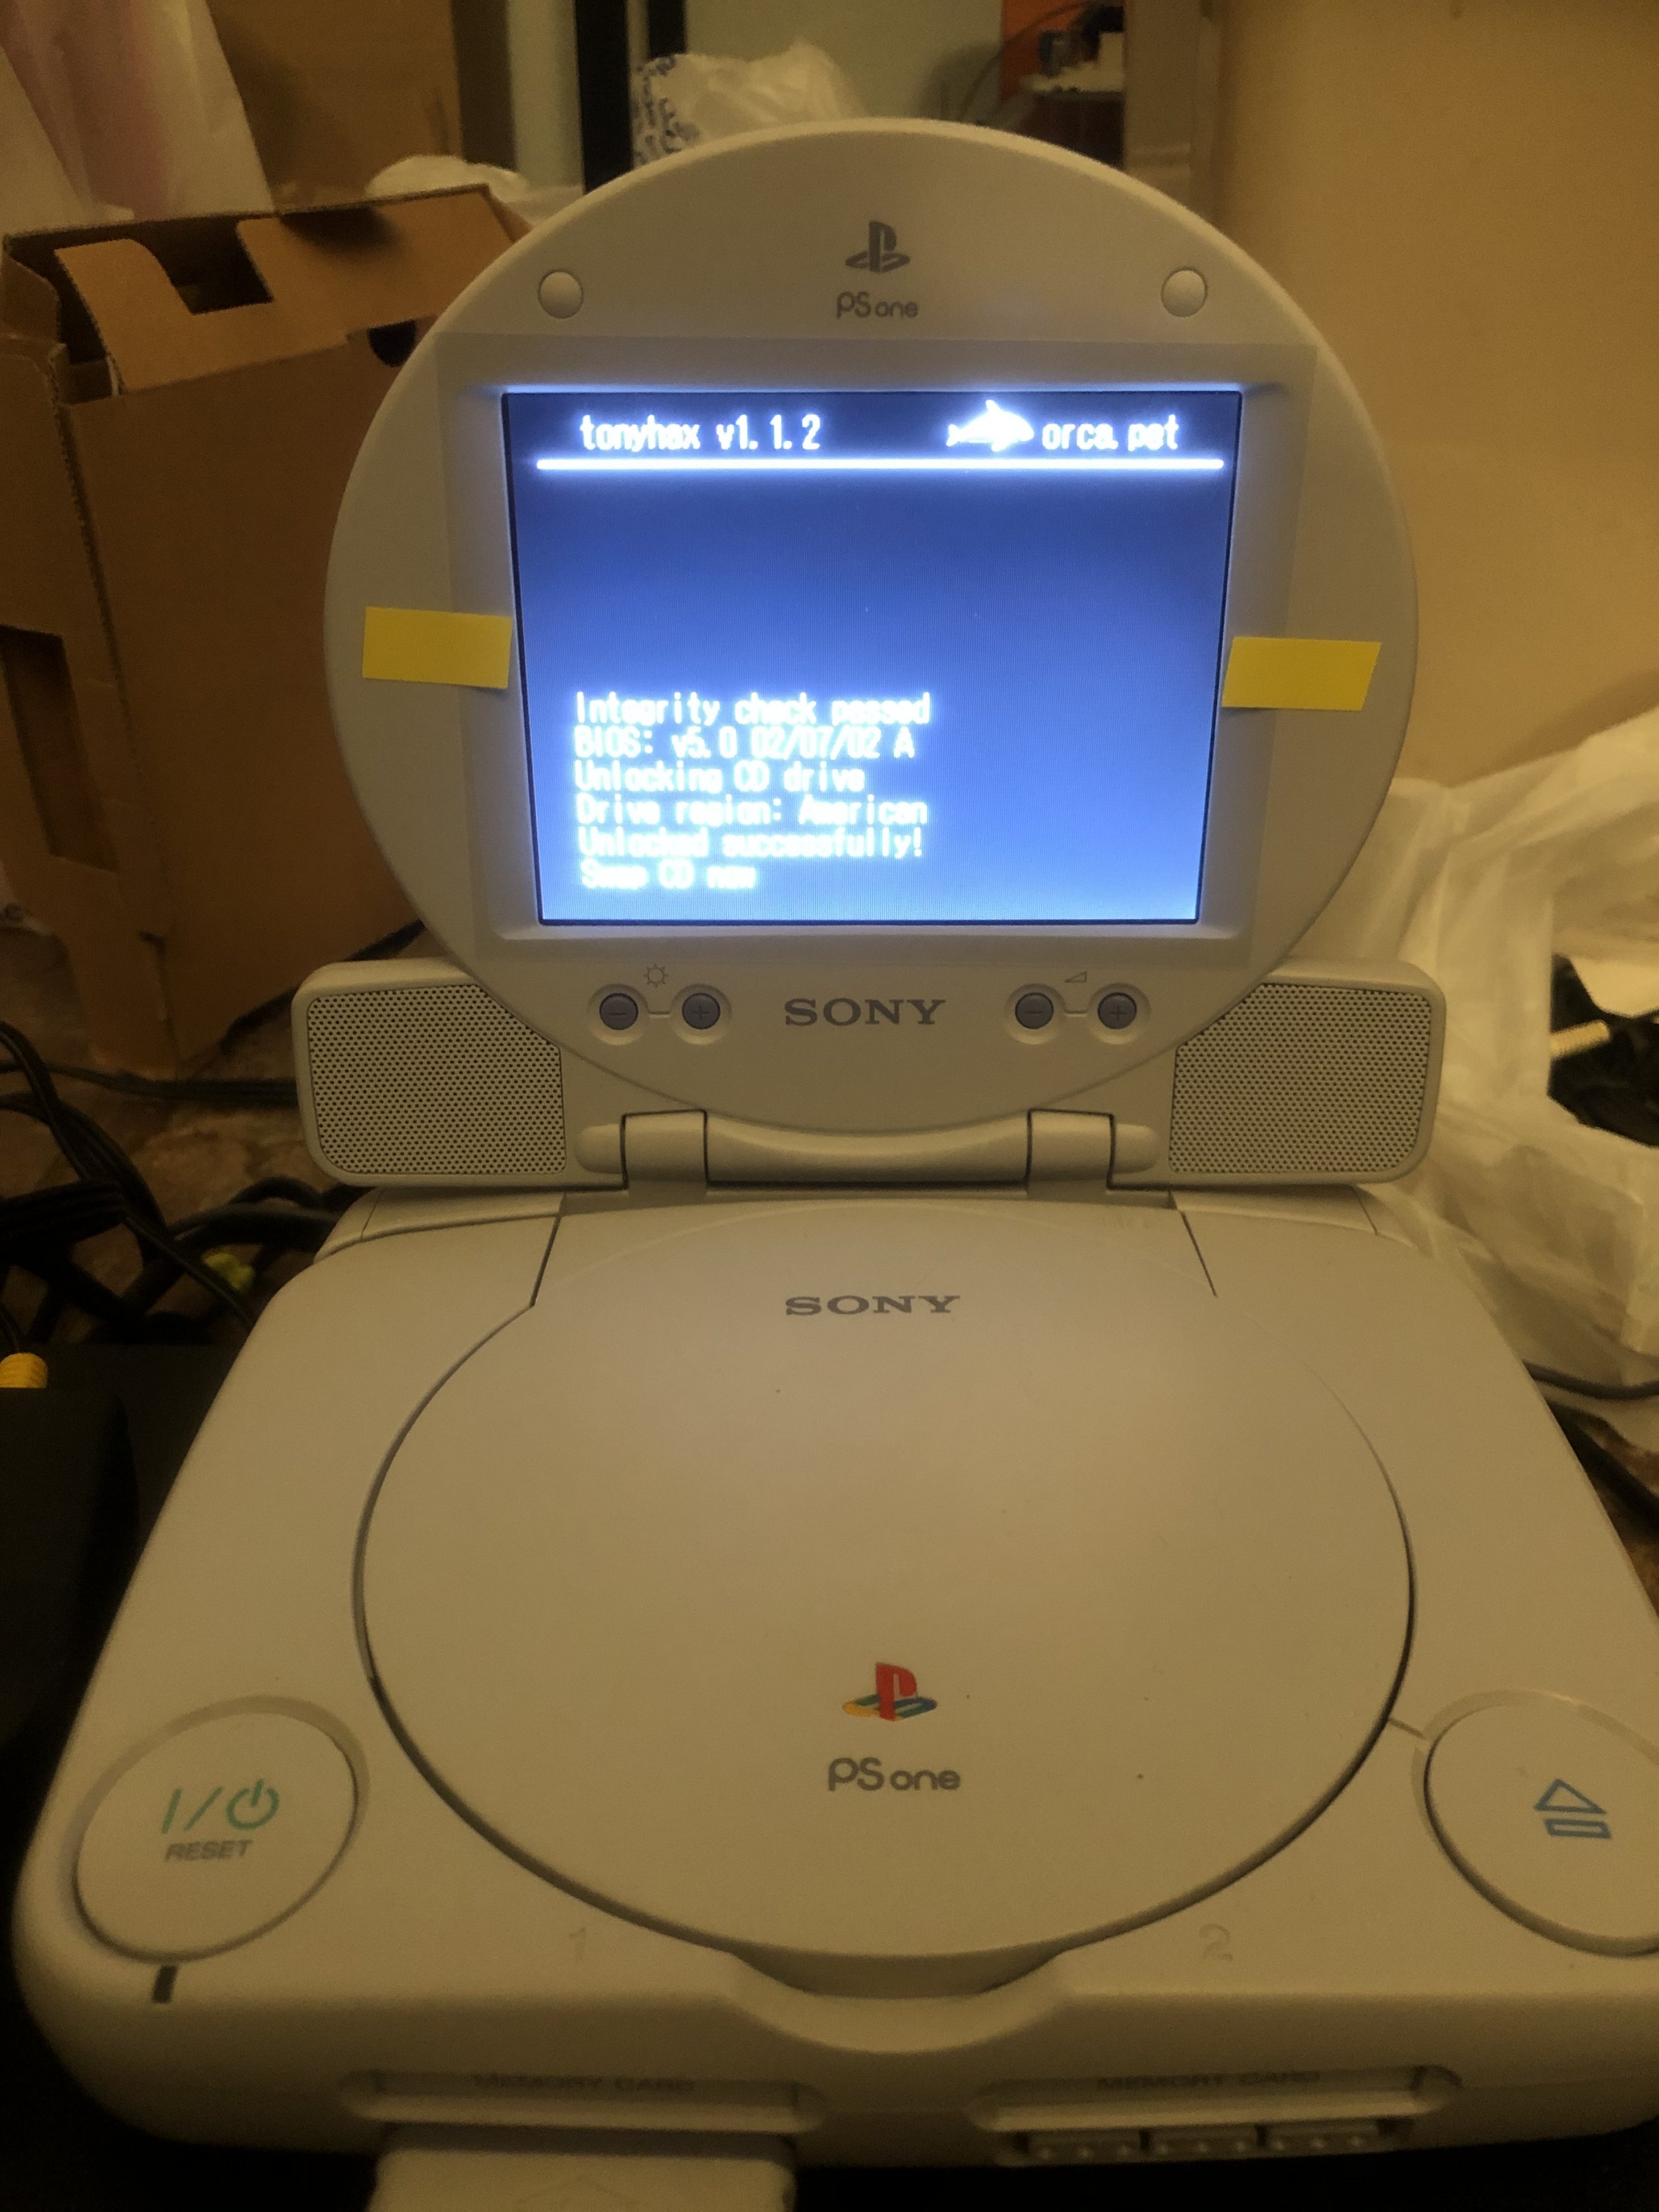 Tonyhax is a new softmod backup loader for the PlayStation 1 | Page 9 |  GBAtemp.net - The Independent Video Game Community